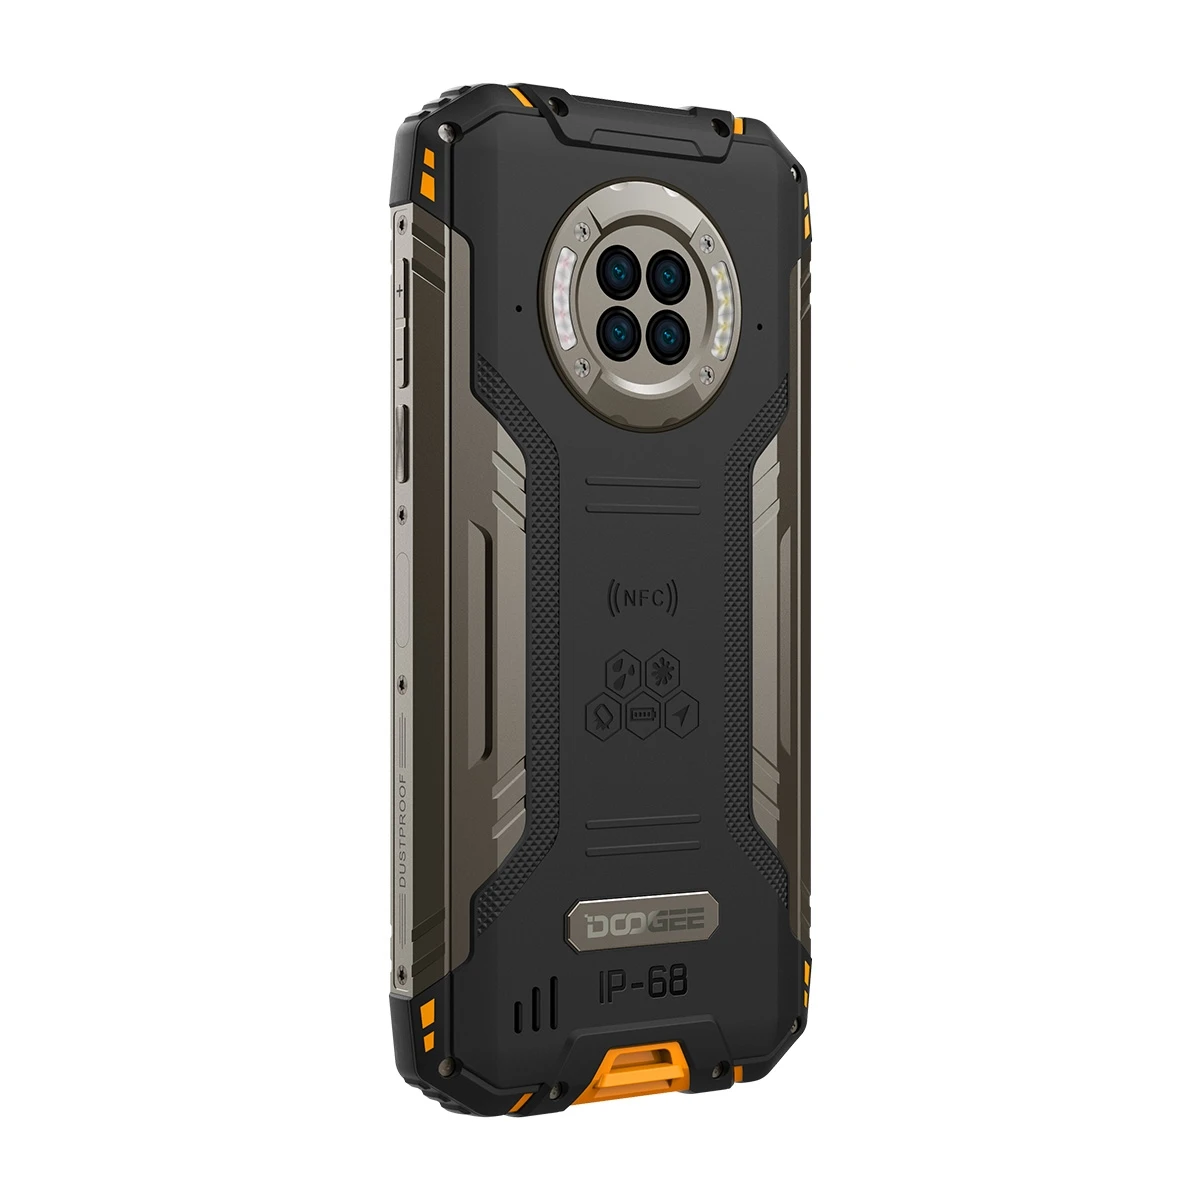 

In Stock DOOGEE S96 Pro Rugged Phone 6.22 inch Infrared Night Vision Helio G90 Octa Core 8GB+128GB 6350mAh s96 pro doogee